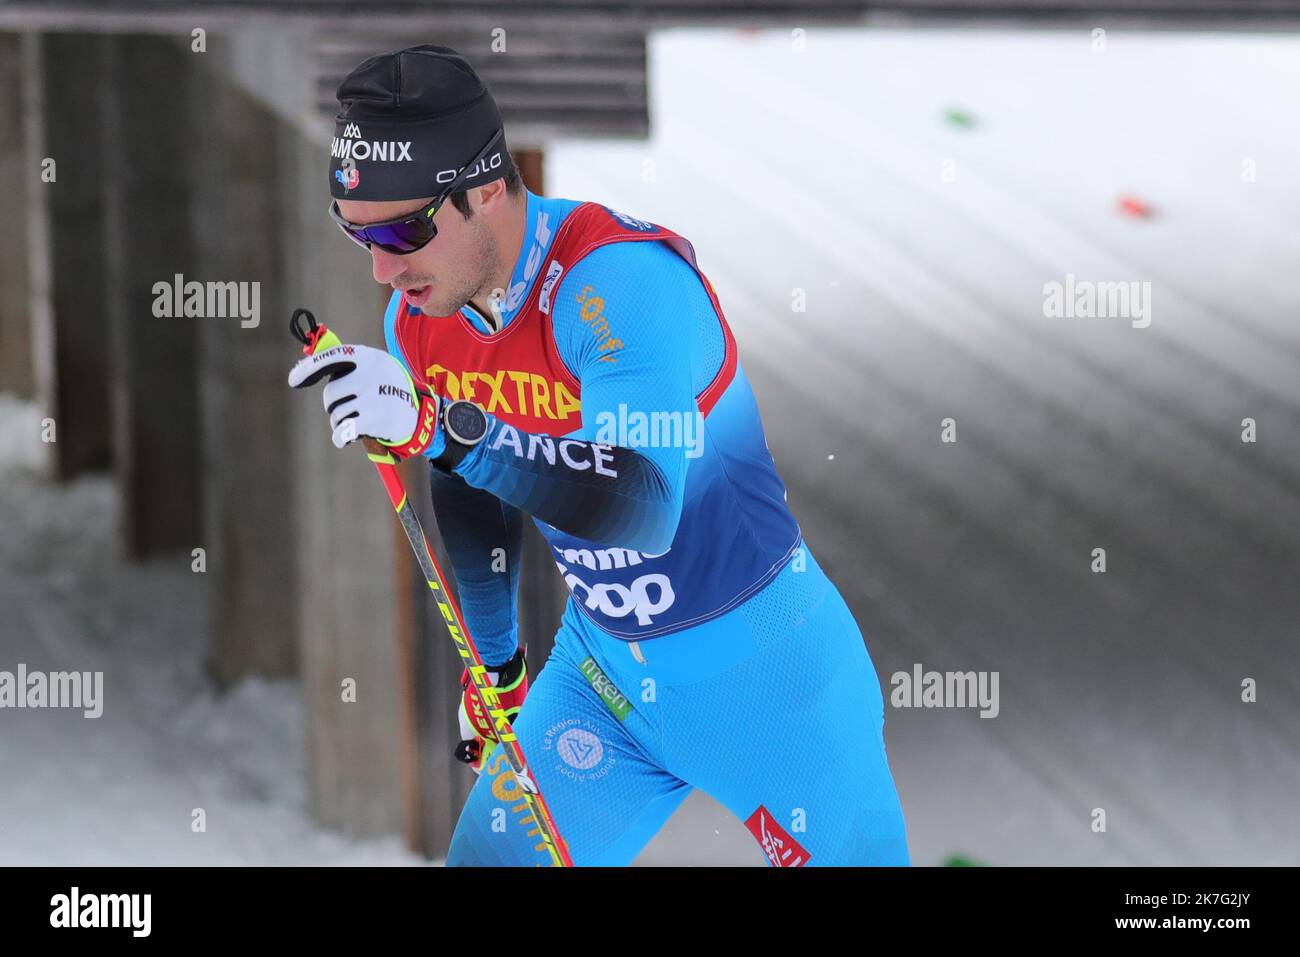 ©Pierre Teyssot/MAXPPP ; Tour de ski - FIS Cross Country Skiing World Cup 2022 under Covid-19 Pandemic. Lago di Tesero, Val Di Fiemme, Italy on January 3, 2022. In action Martin Collet (FRA). Â© Pierre Teyssot / Maxppp  Stock Photo